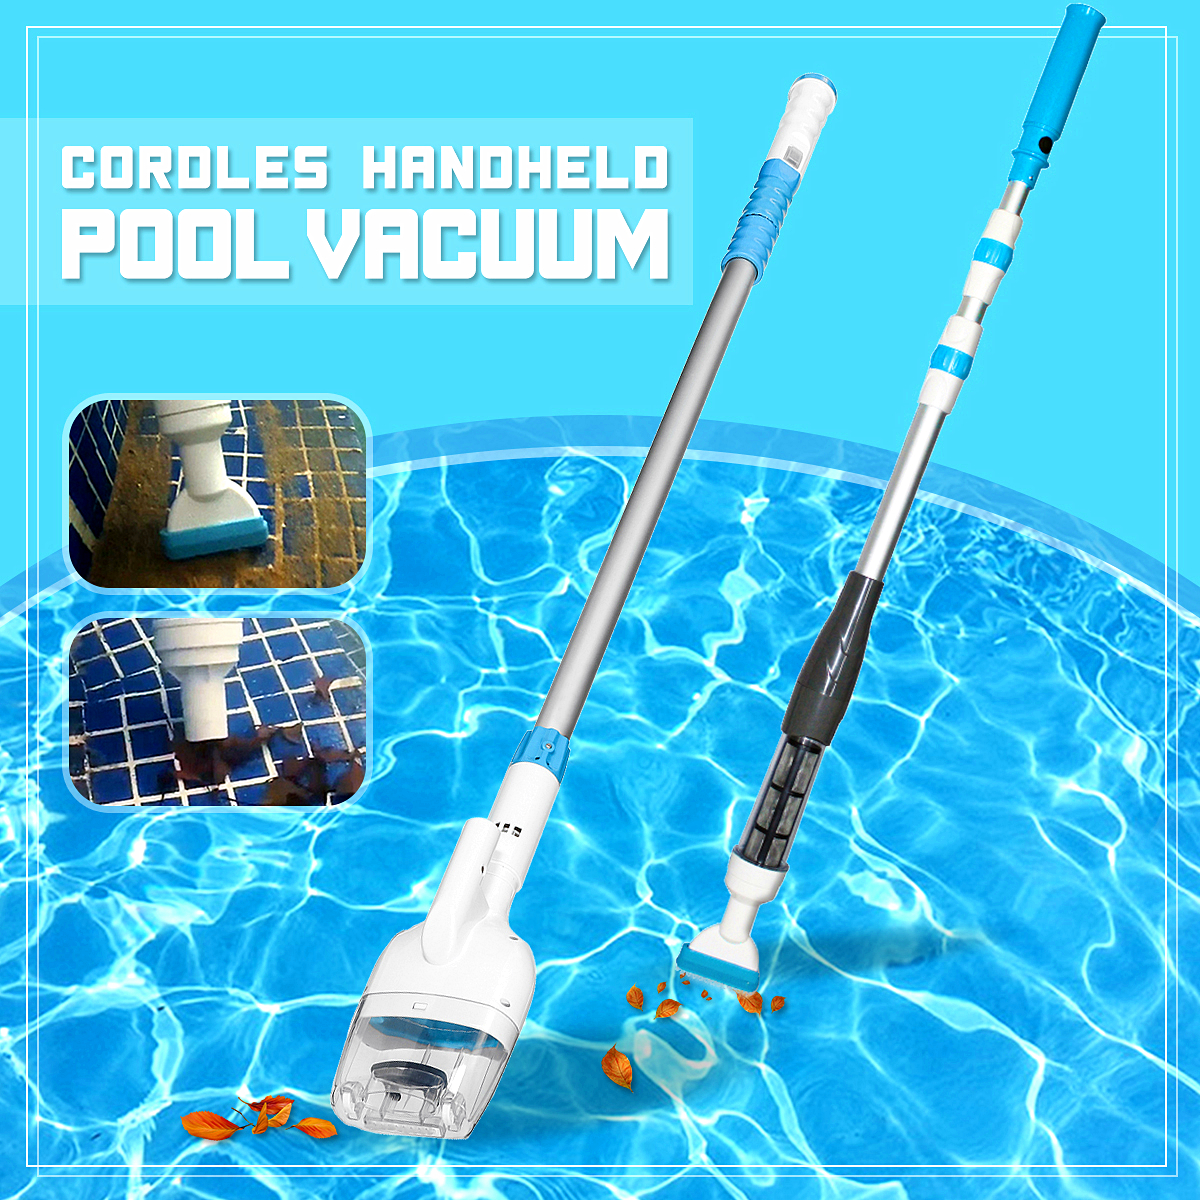 Handheld-Cordless-Swimming-Pool-Vacuum-Cleaner-Waterproof-IPX8-Rechargeable-Vac-Above-Ground-Cleanin-1559729-2